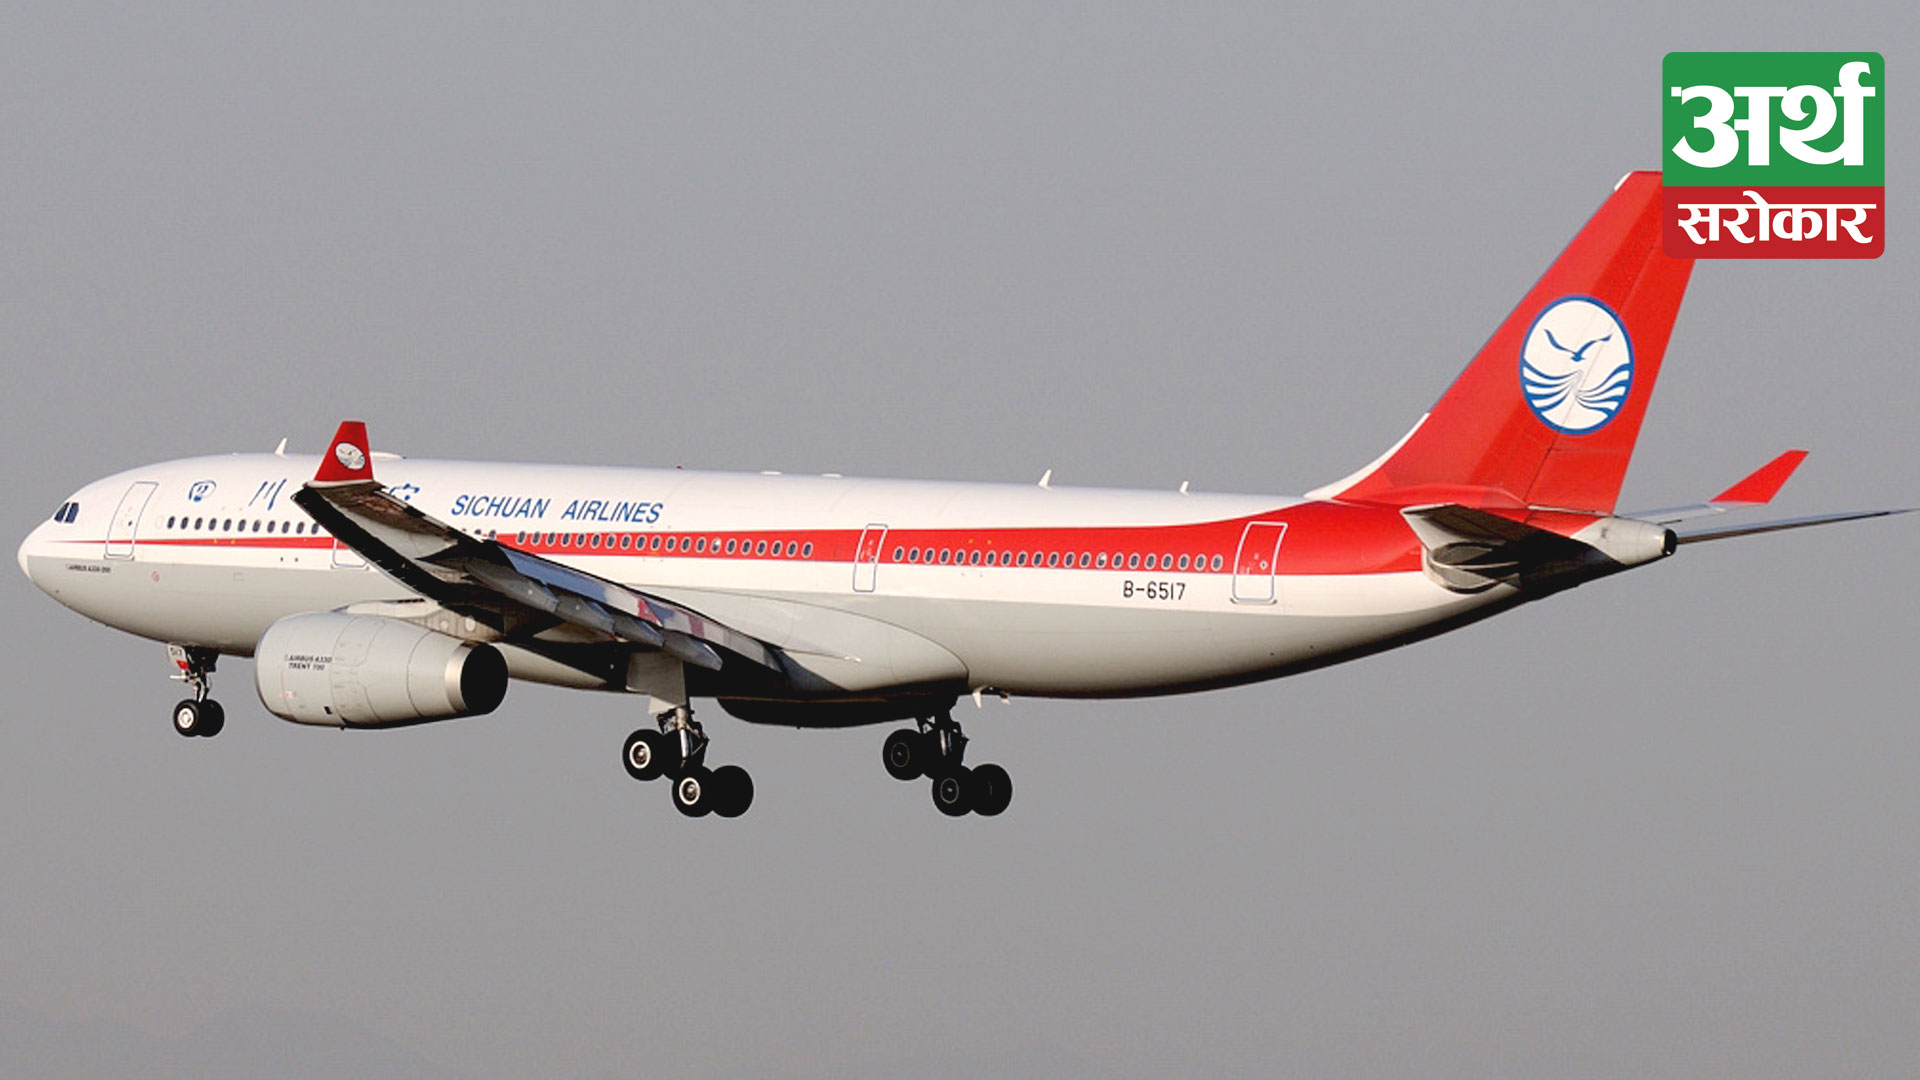 Sichuan Airlines announce the resumption of their scheduled flights to and from TIA